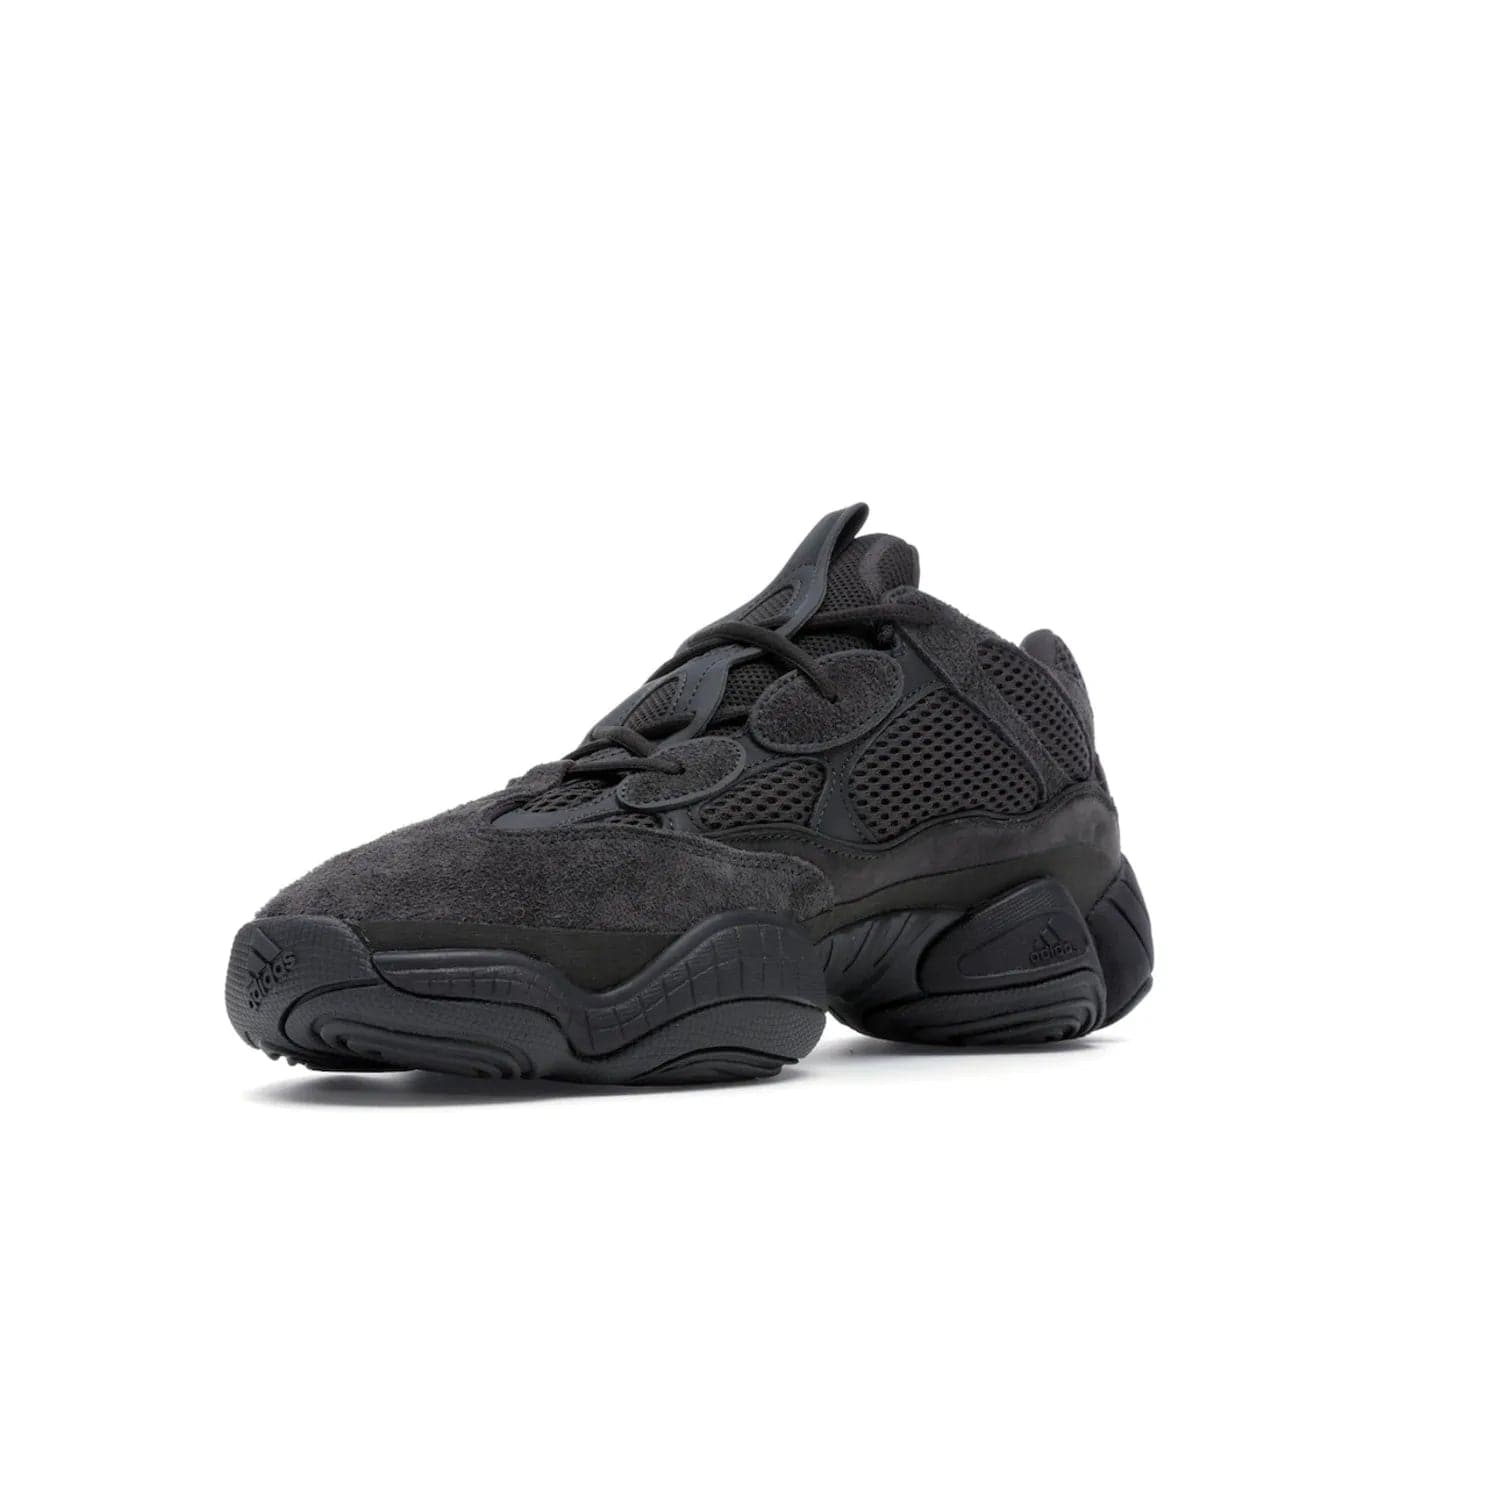 adidas Yeezy 500 Utility Black - Image 15 - Only at www.BallersClubKickz.com - Iconic adidas Yeezy 500 Utility Black in All-Black colorway. Durable black mesh and suede upper with adiPRENE® sole delivers comfort and support. Be unstoppable with the Yeezy 500 Utility Black. Released July 2018.